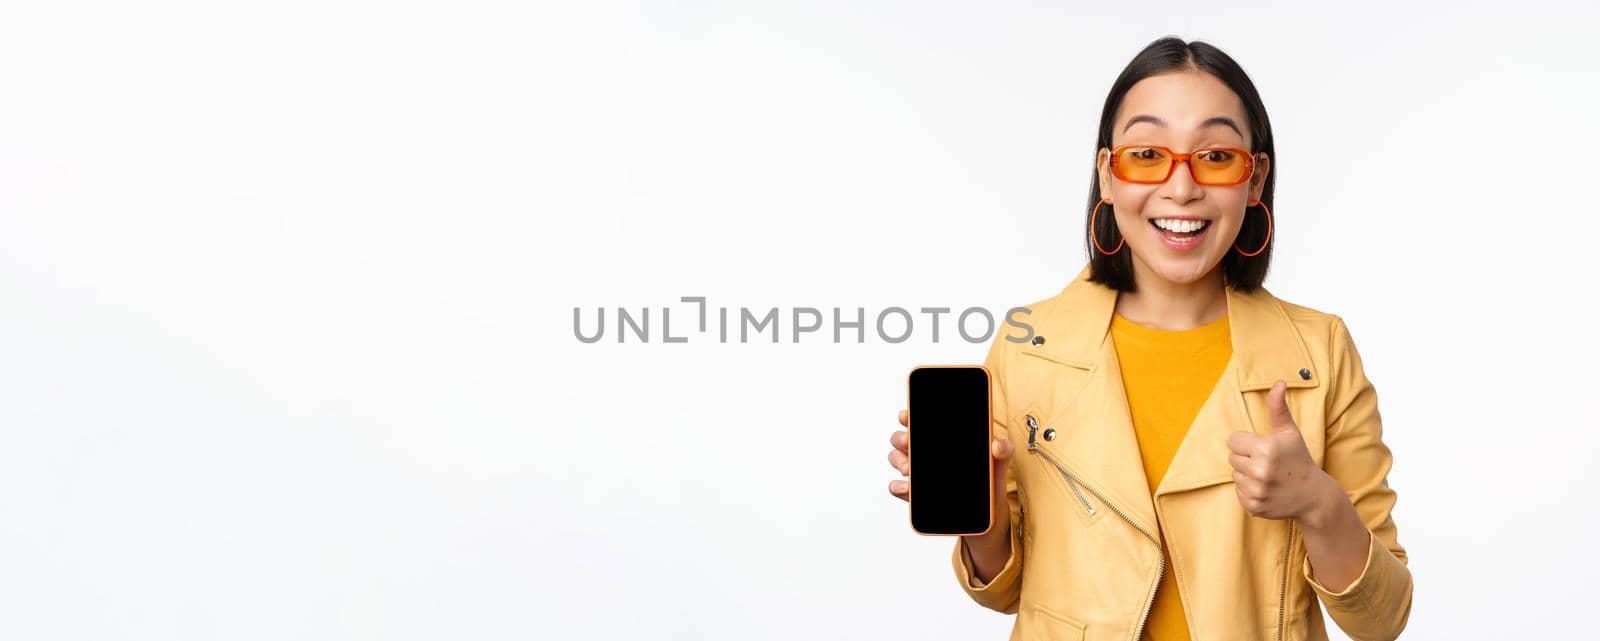 Beautiful korean girl, asian woman in sunglasses, showing smartphone app interface, thumbs up, recommending mobile phone application, white background.